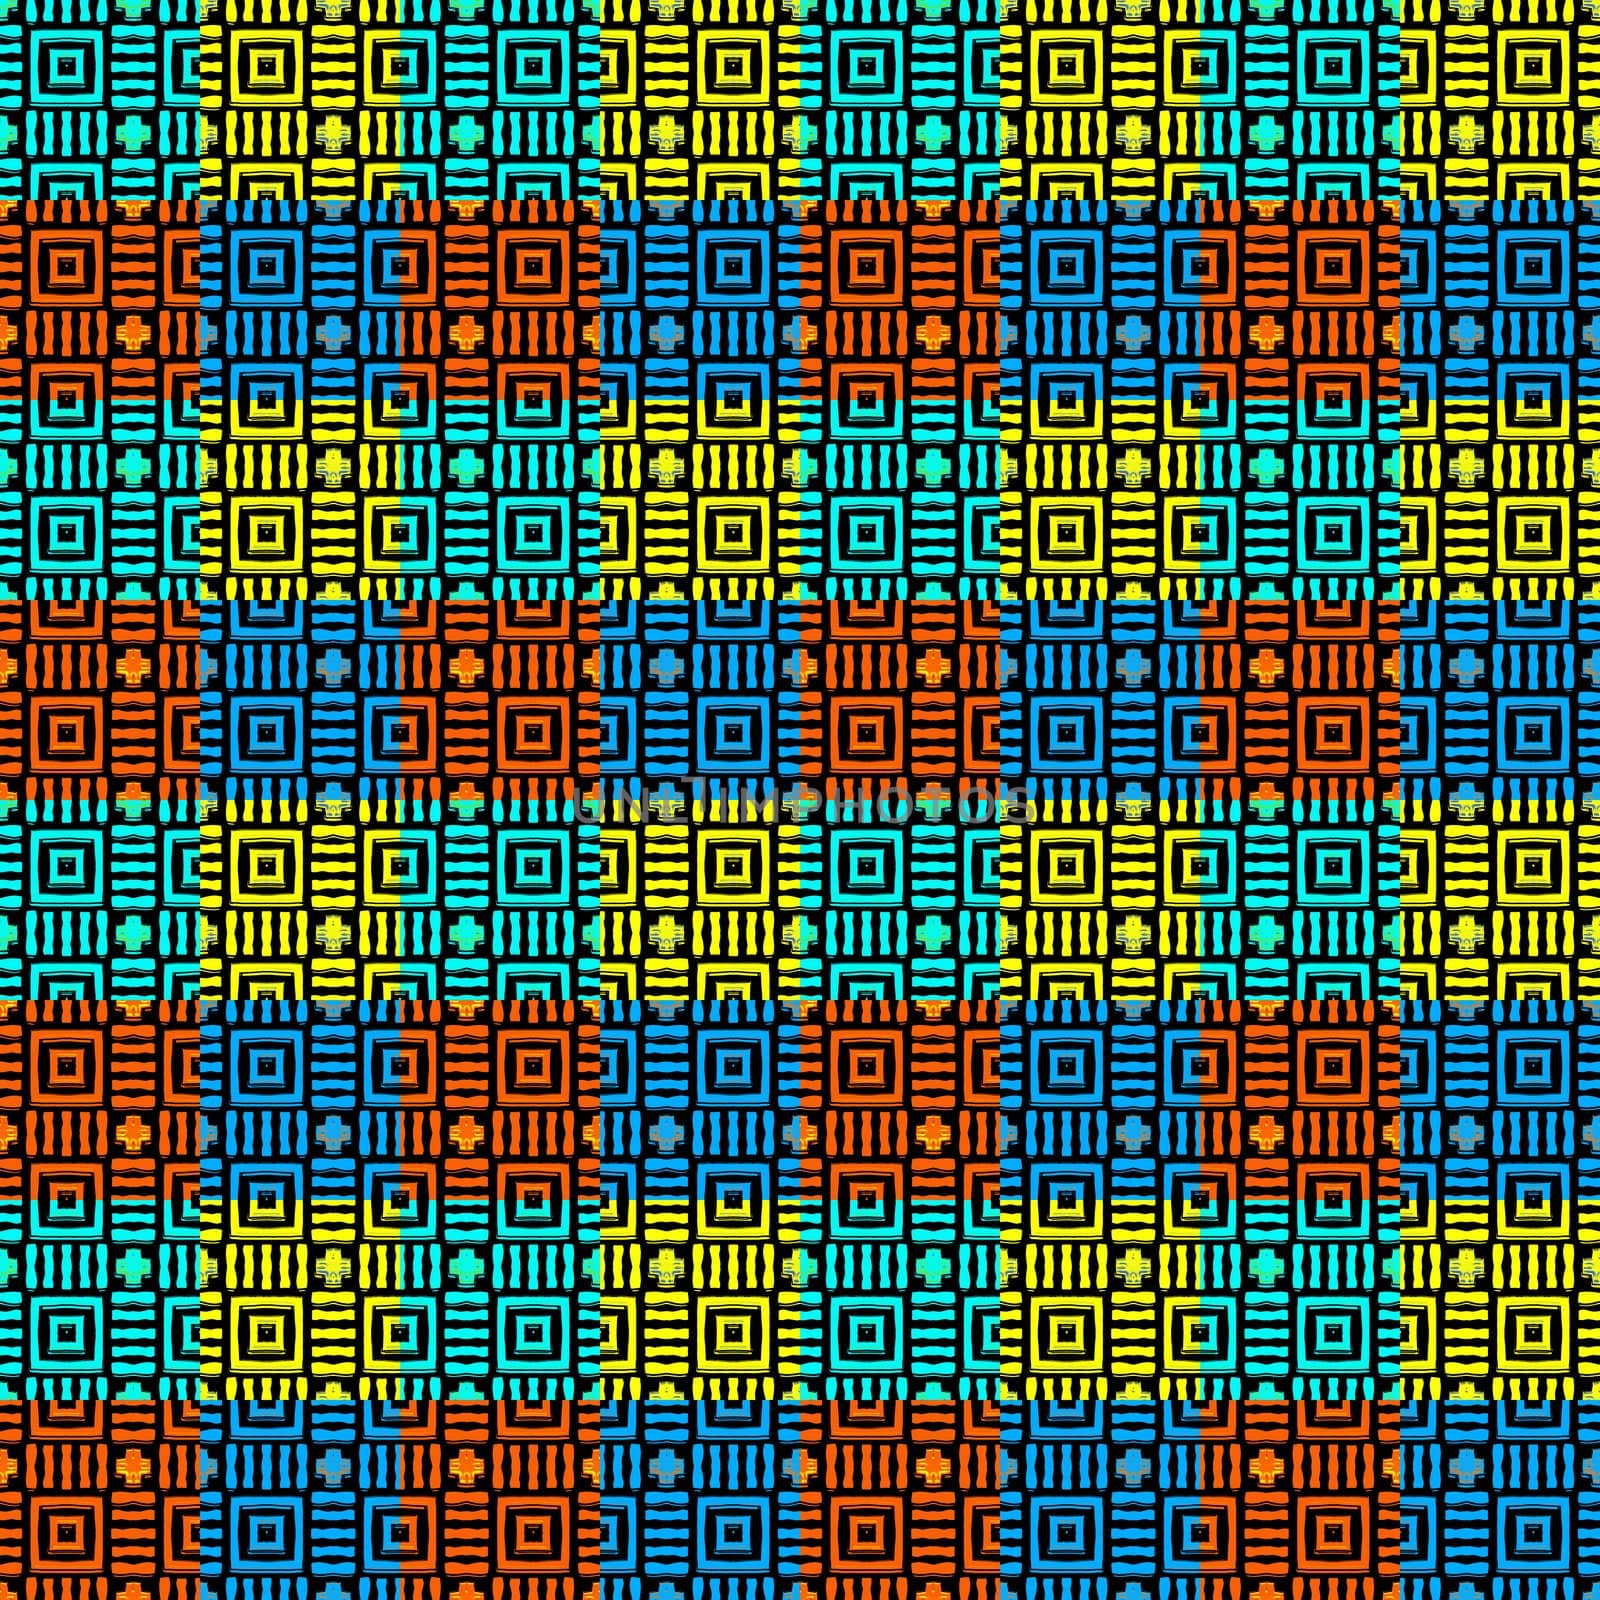 seamless texture of bright colored blocks with texture